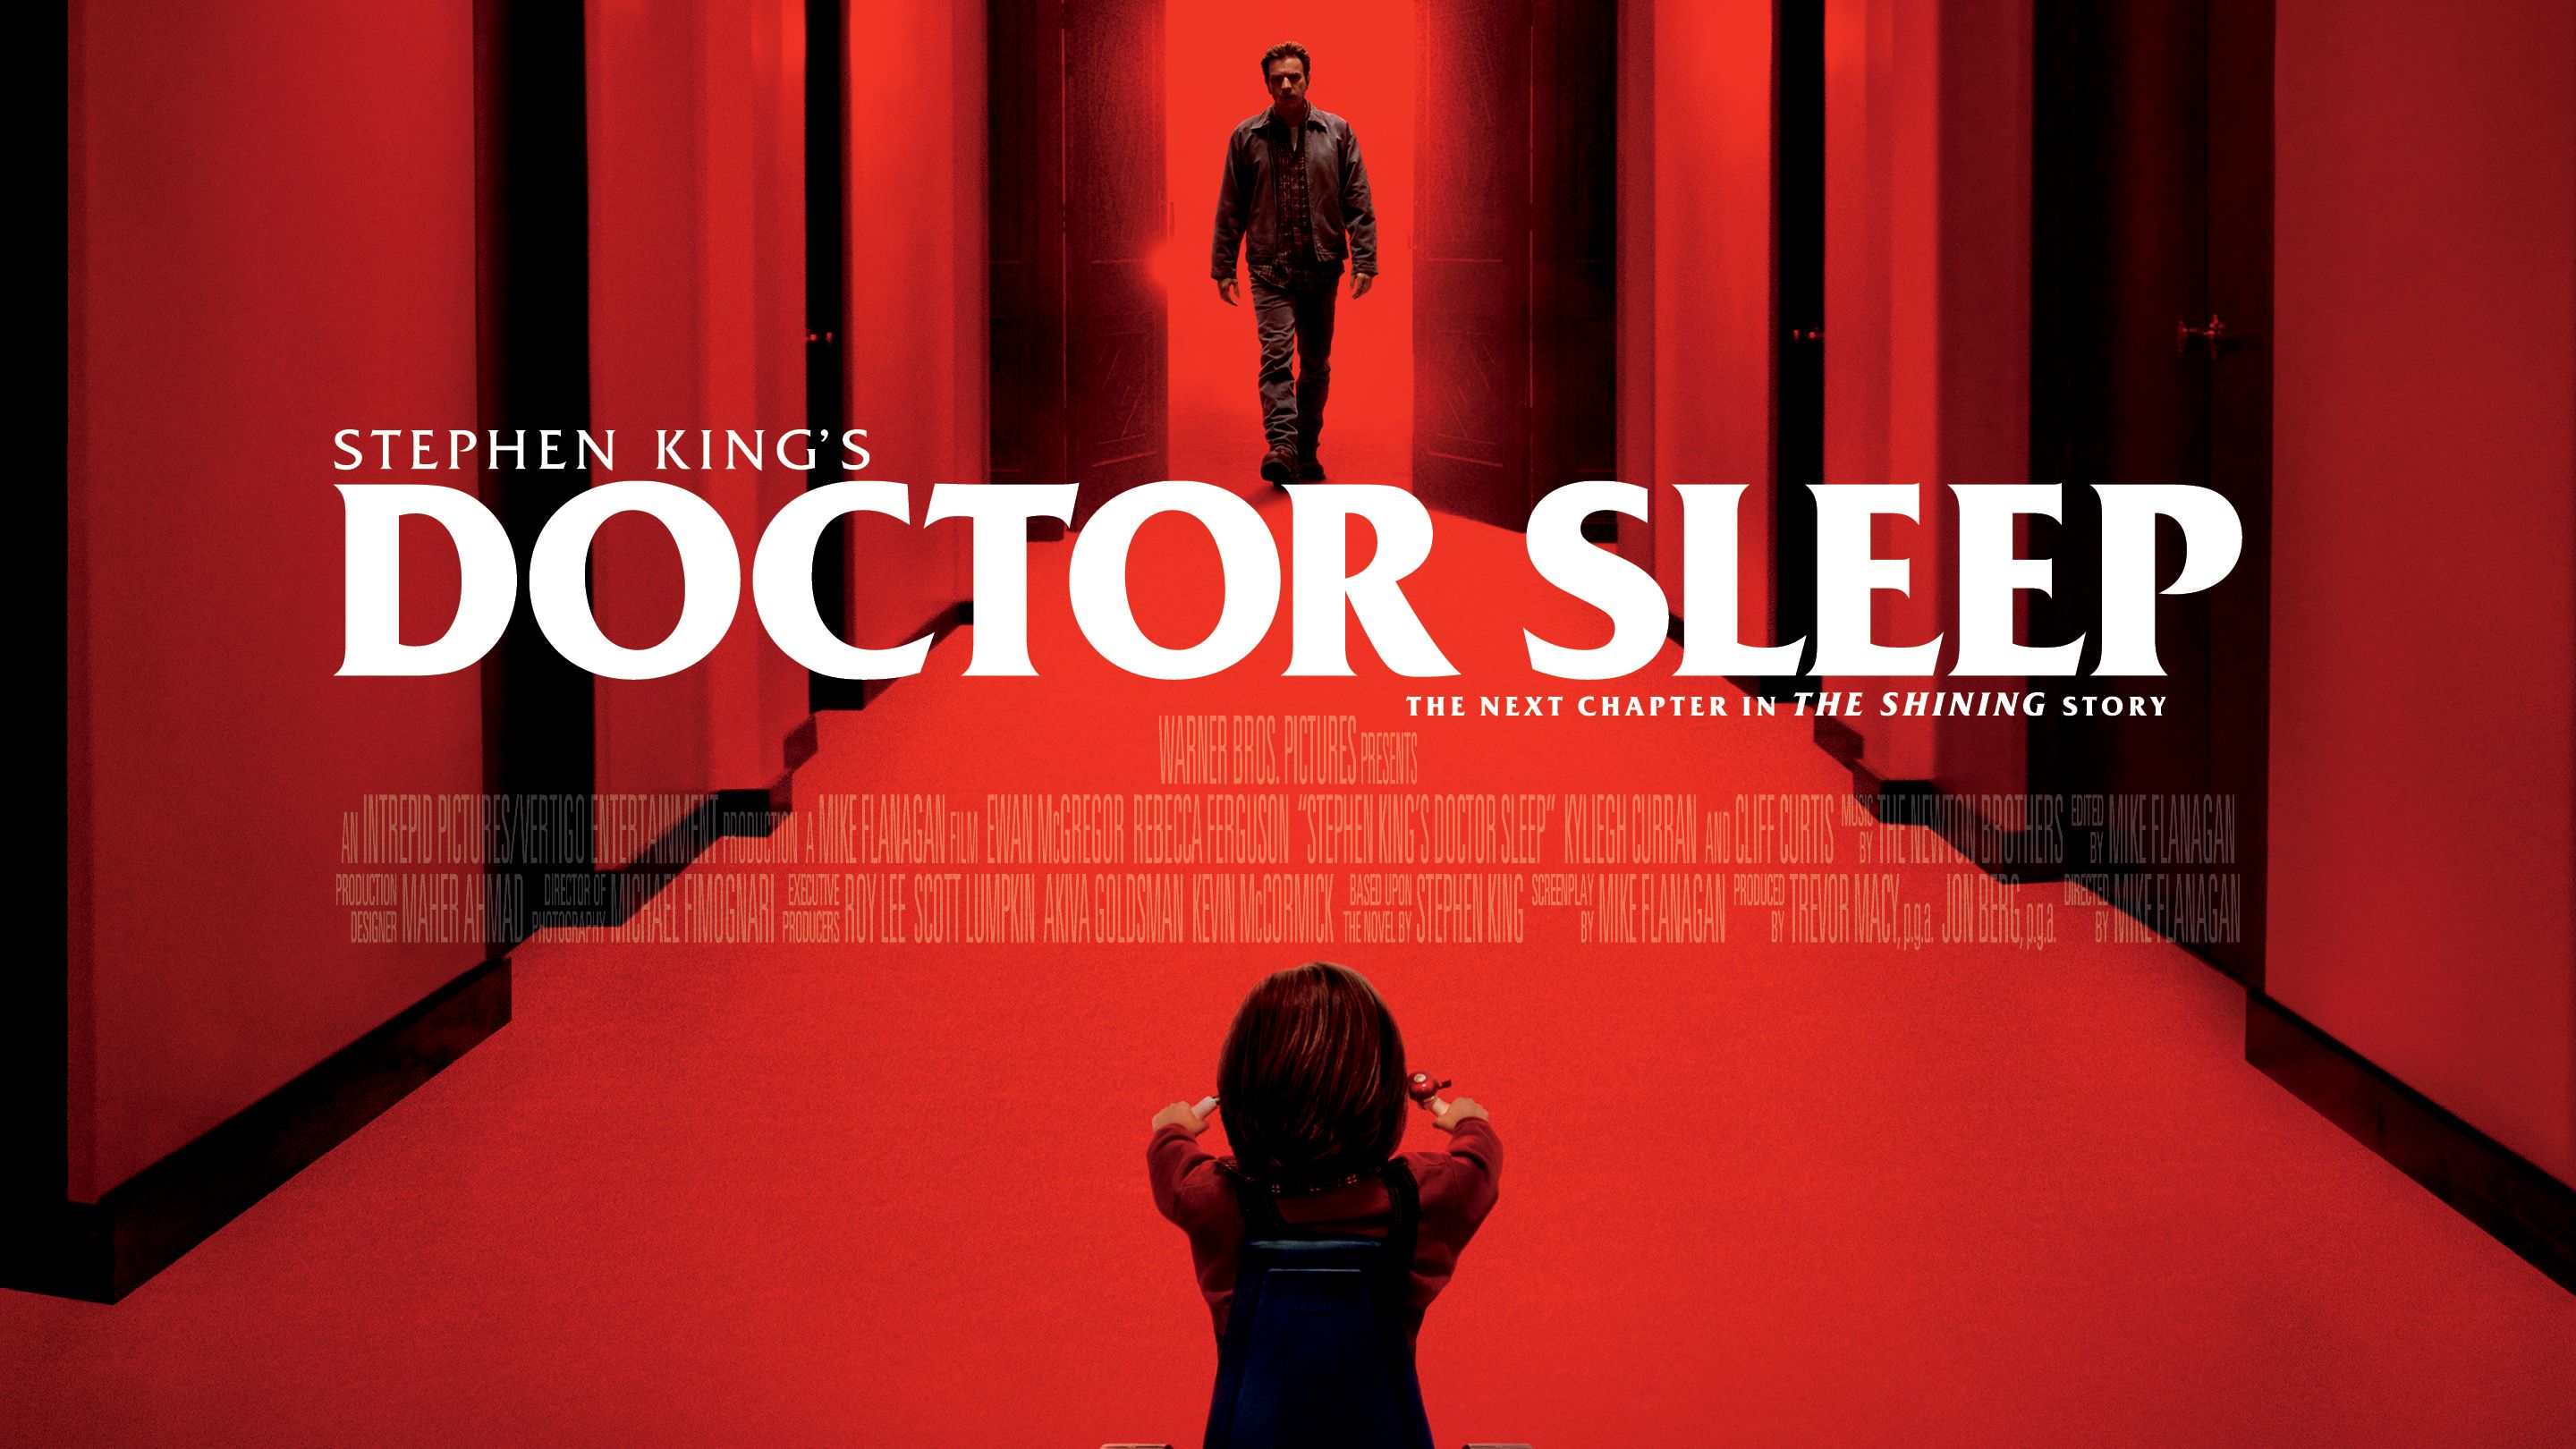 37-facts-about-the-movie-doctor-sleep